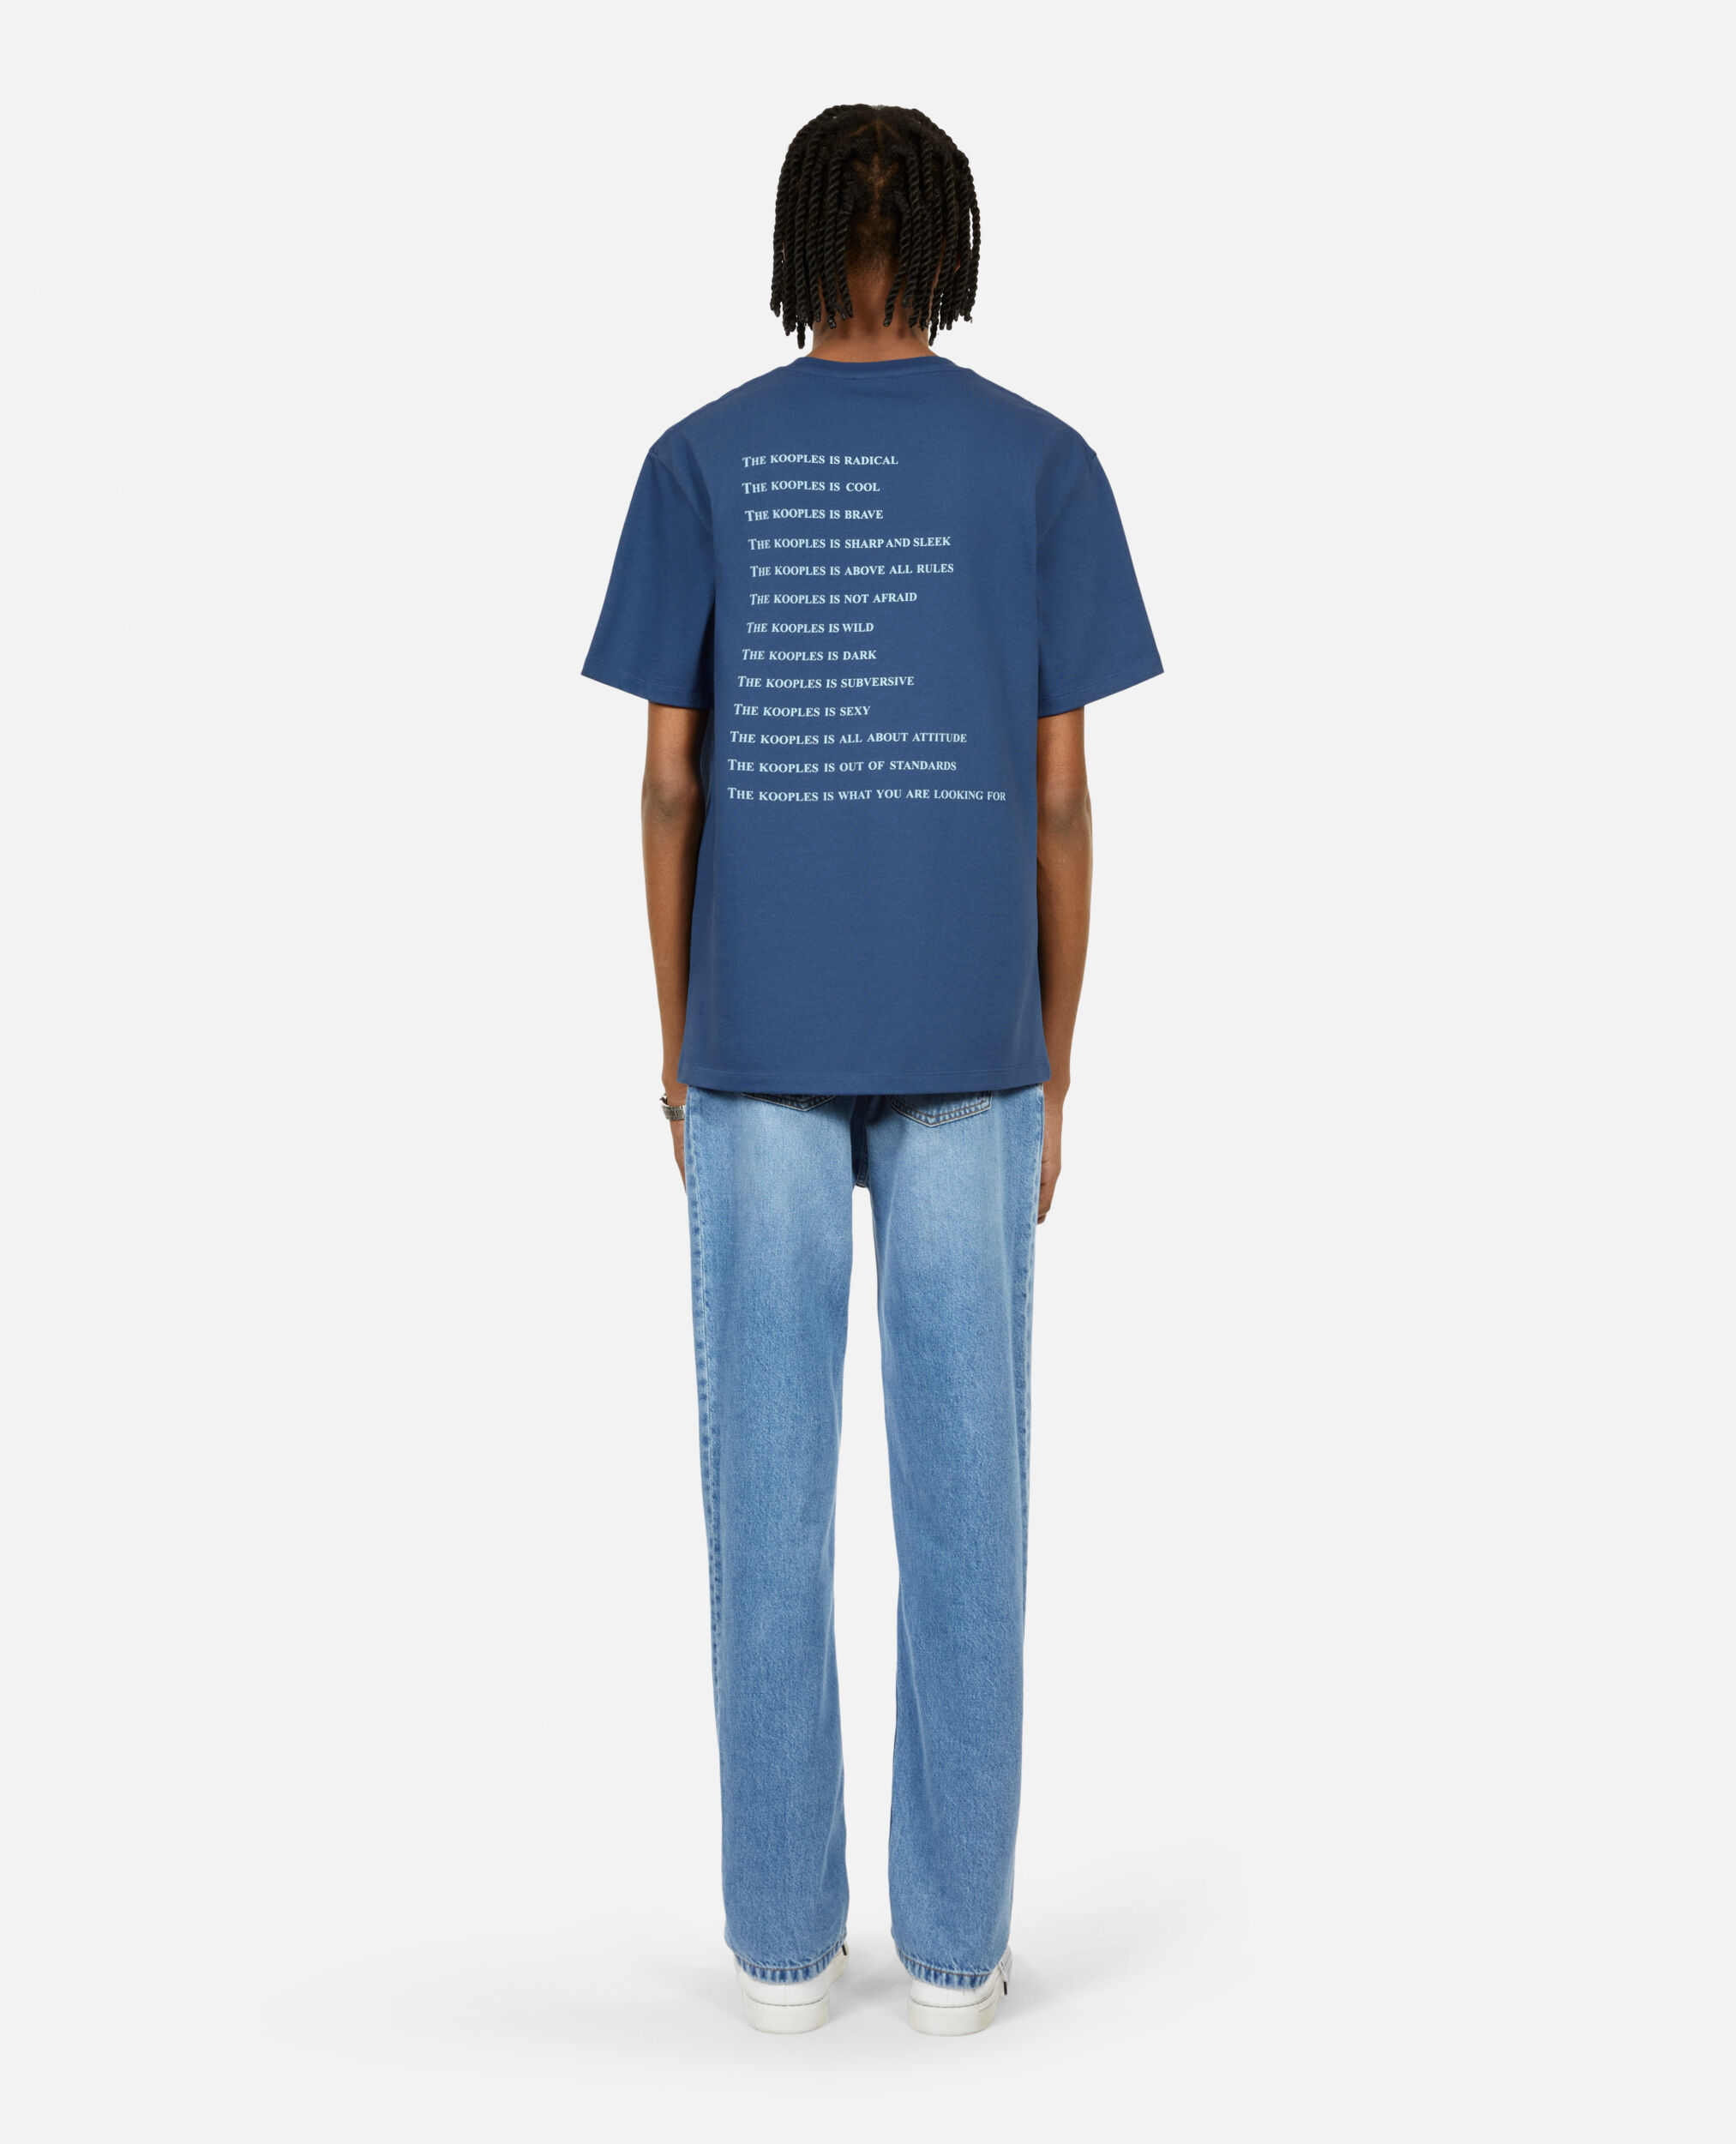 Camiseta What is azul rey, MIDDLE NAVY, hi-res image number null